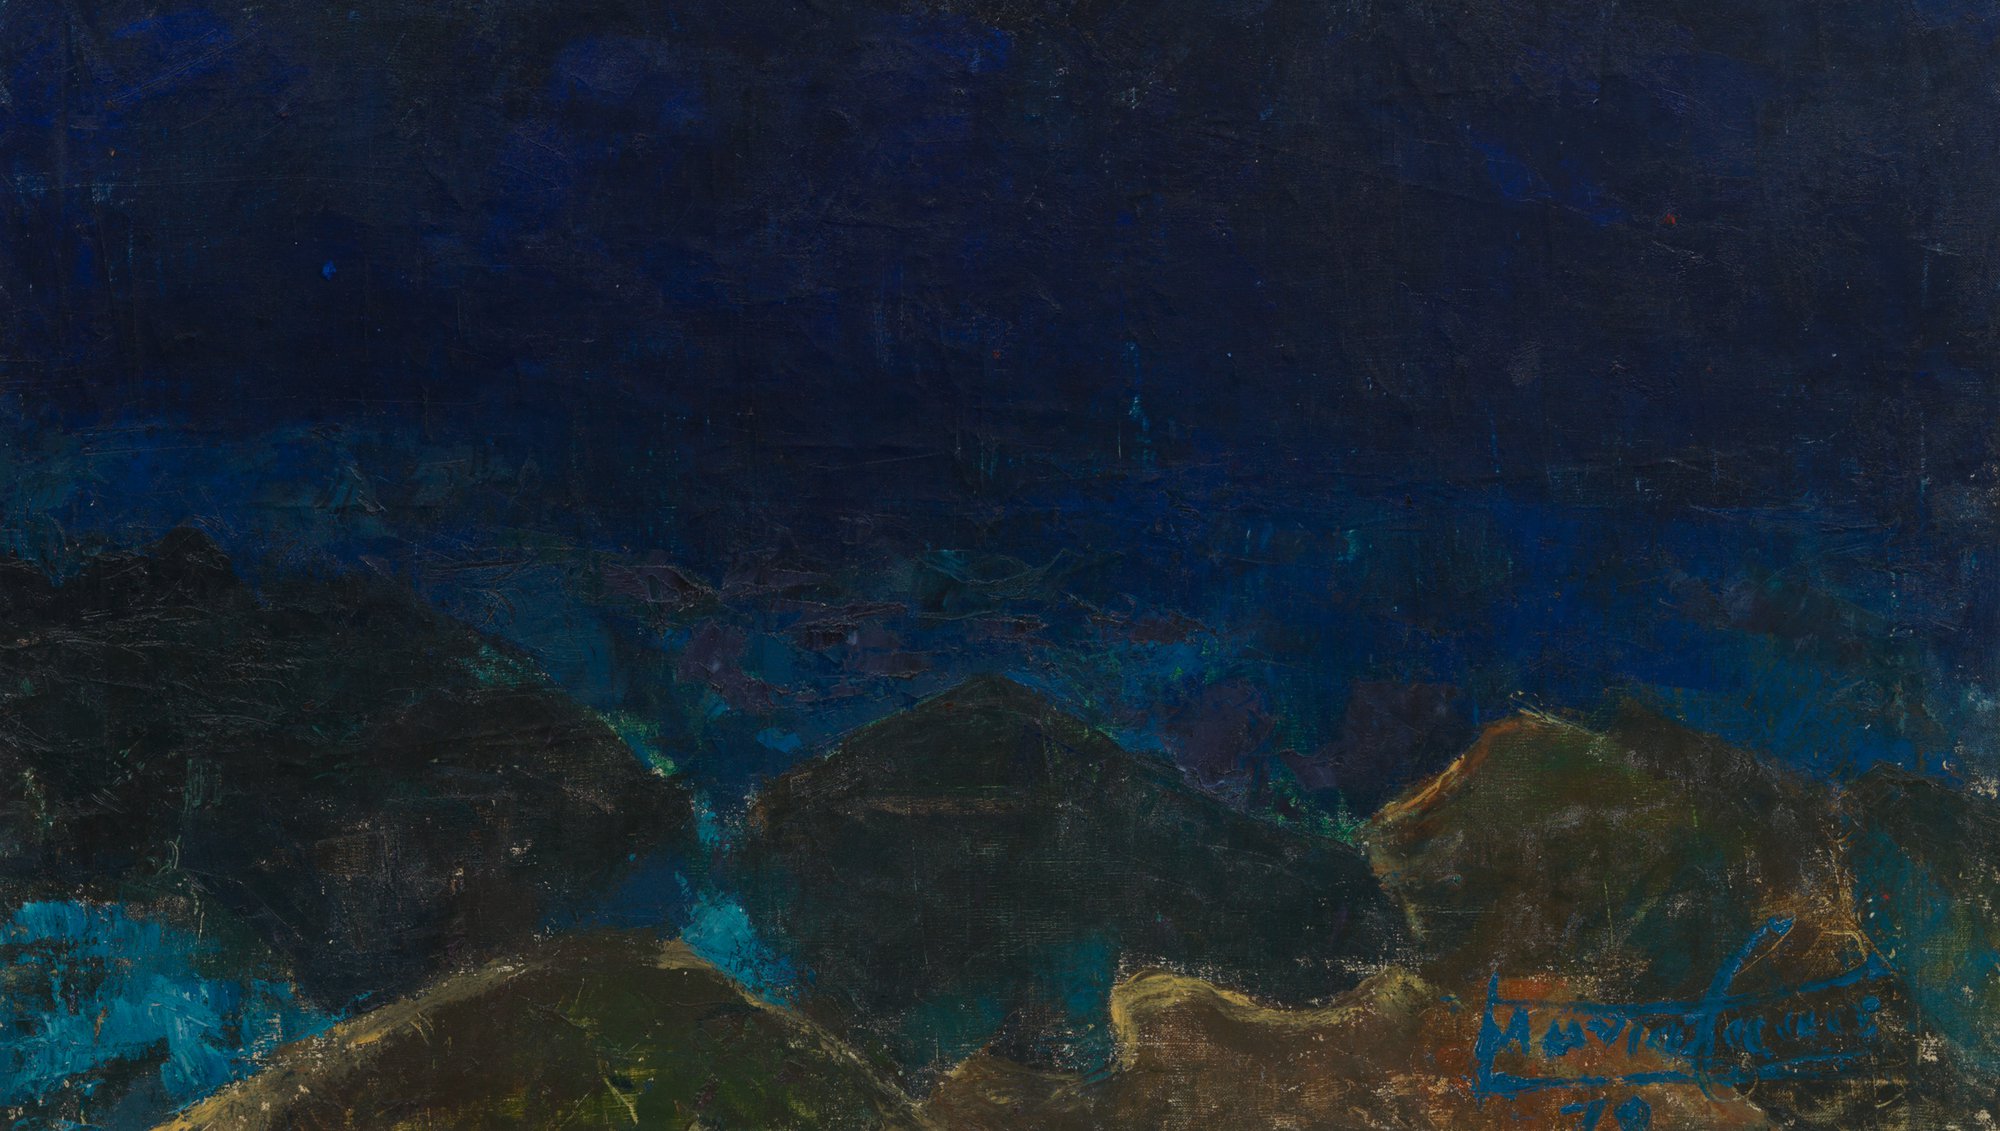 Yiannis Maniatakos, The deapest seabed, Hydra, detail, oil on canvas, 50.5 x 76.5 cm (19 7/8 x 30 1/8 in), 1972